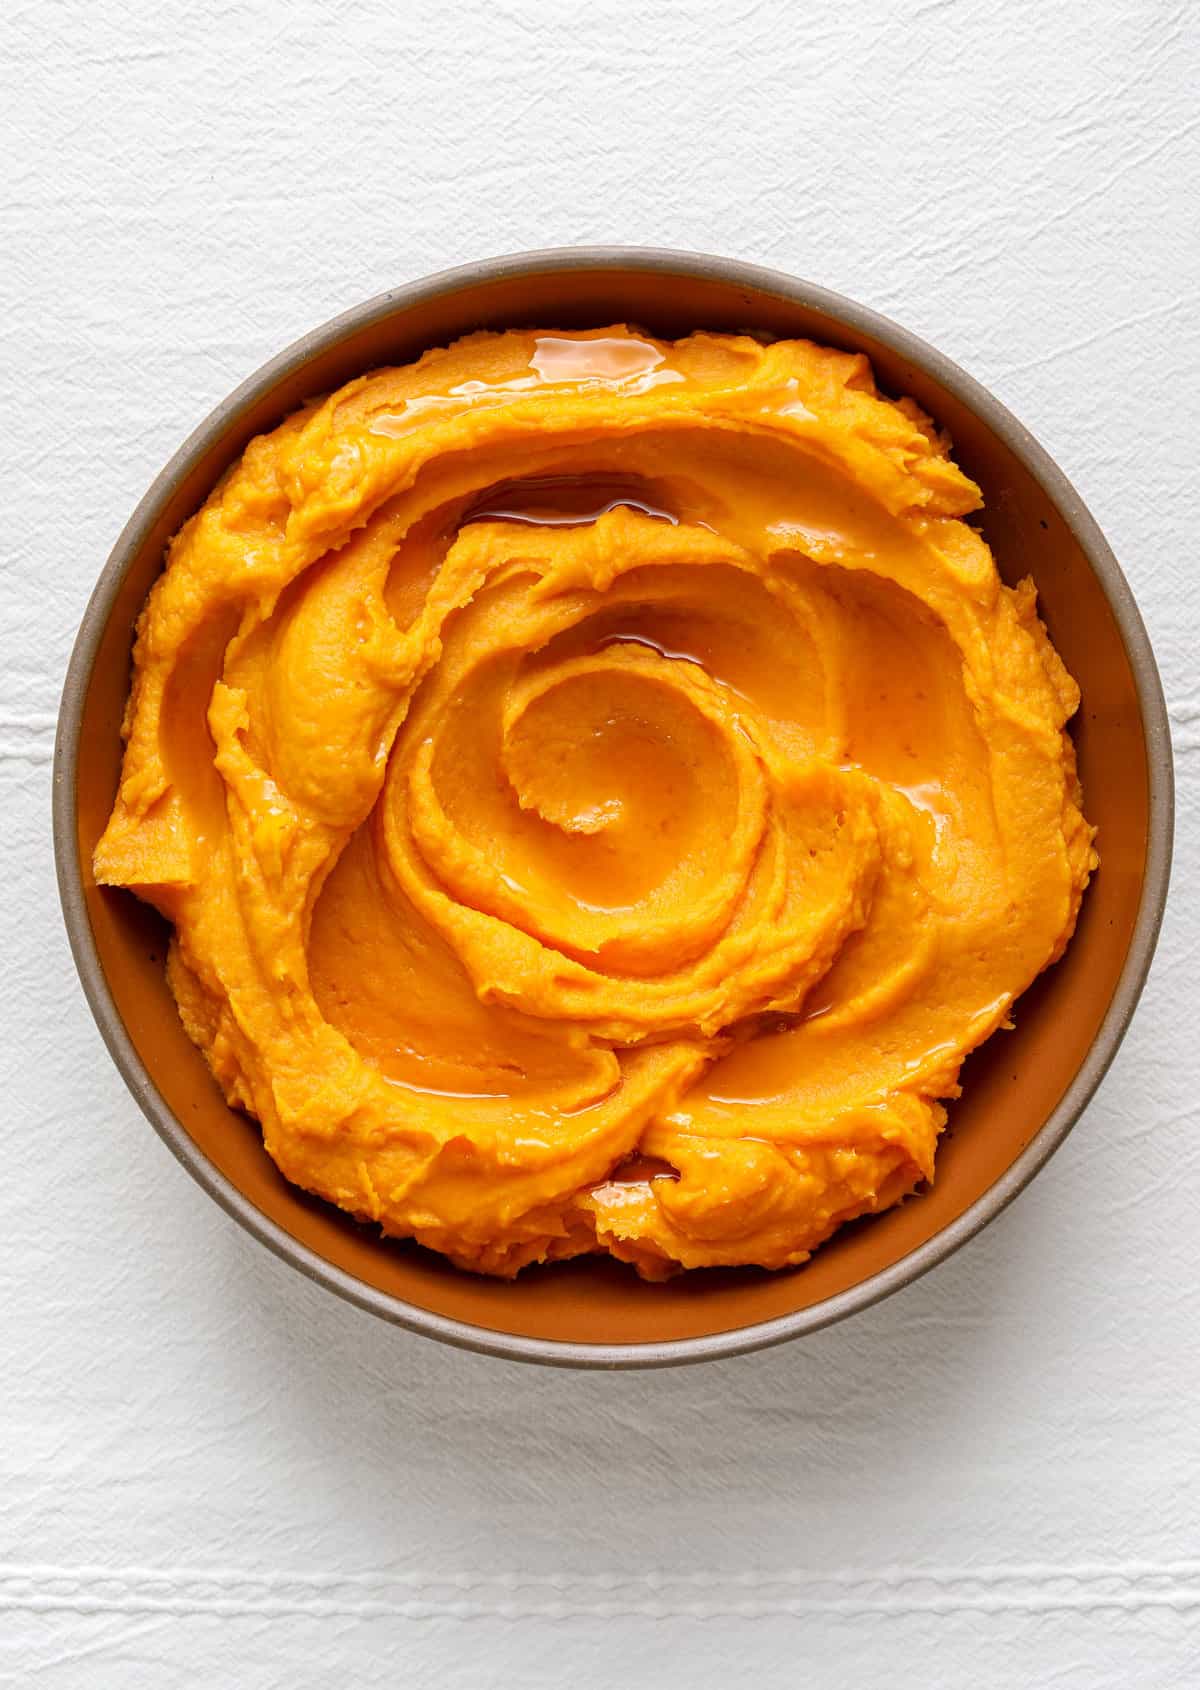 An orange serving bowl filled with sweet potatoes on a white linen table cloth.